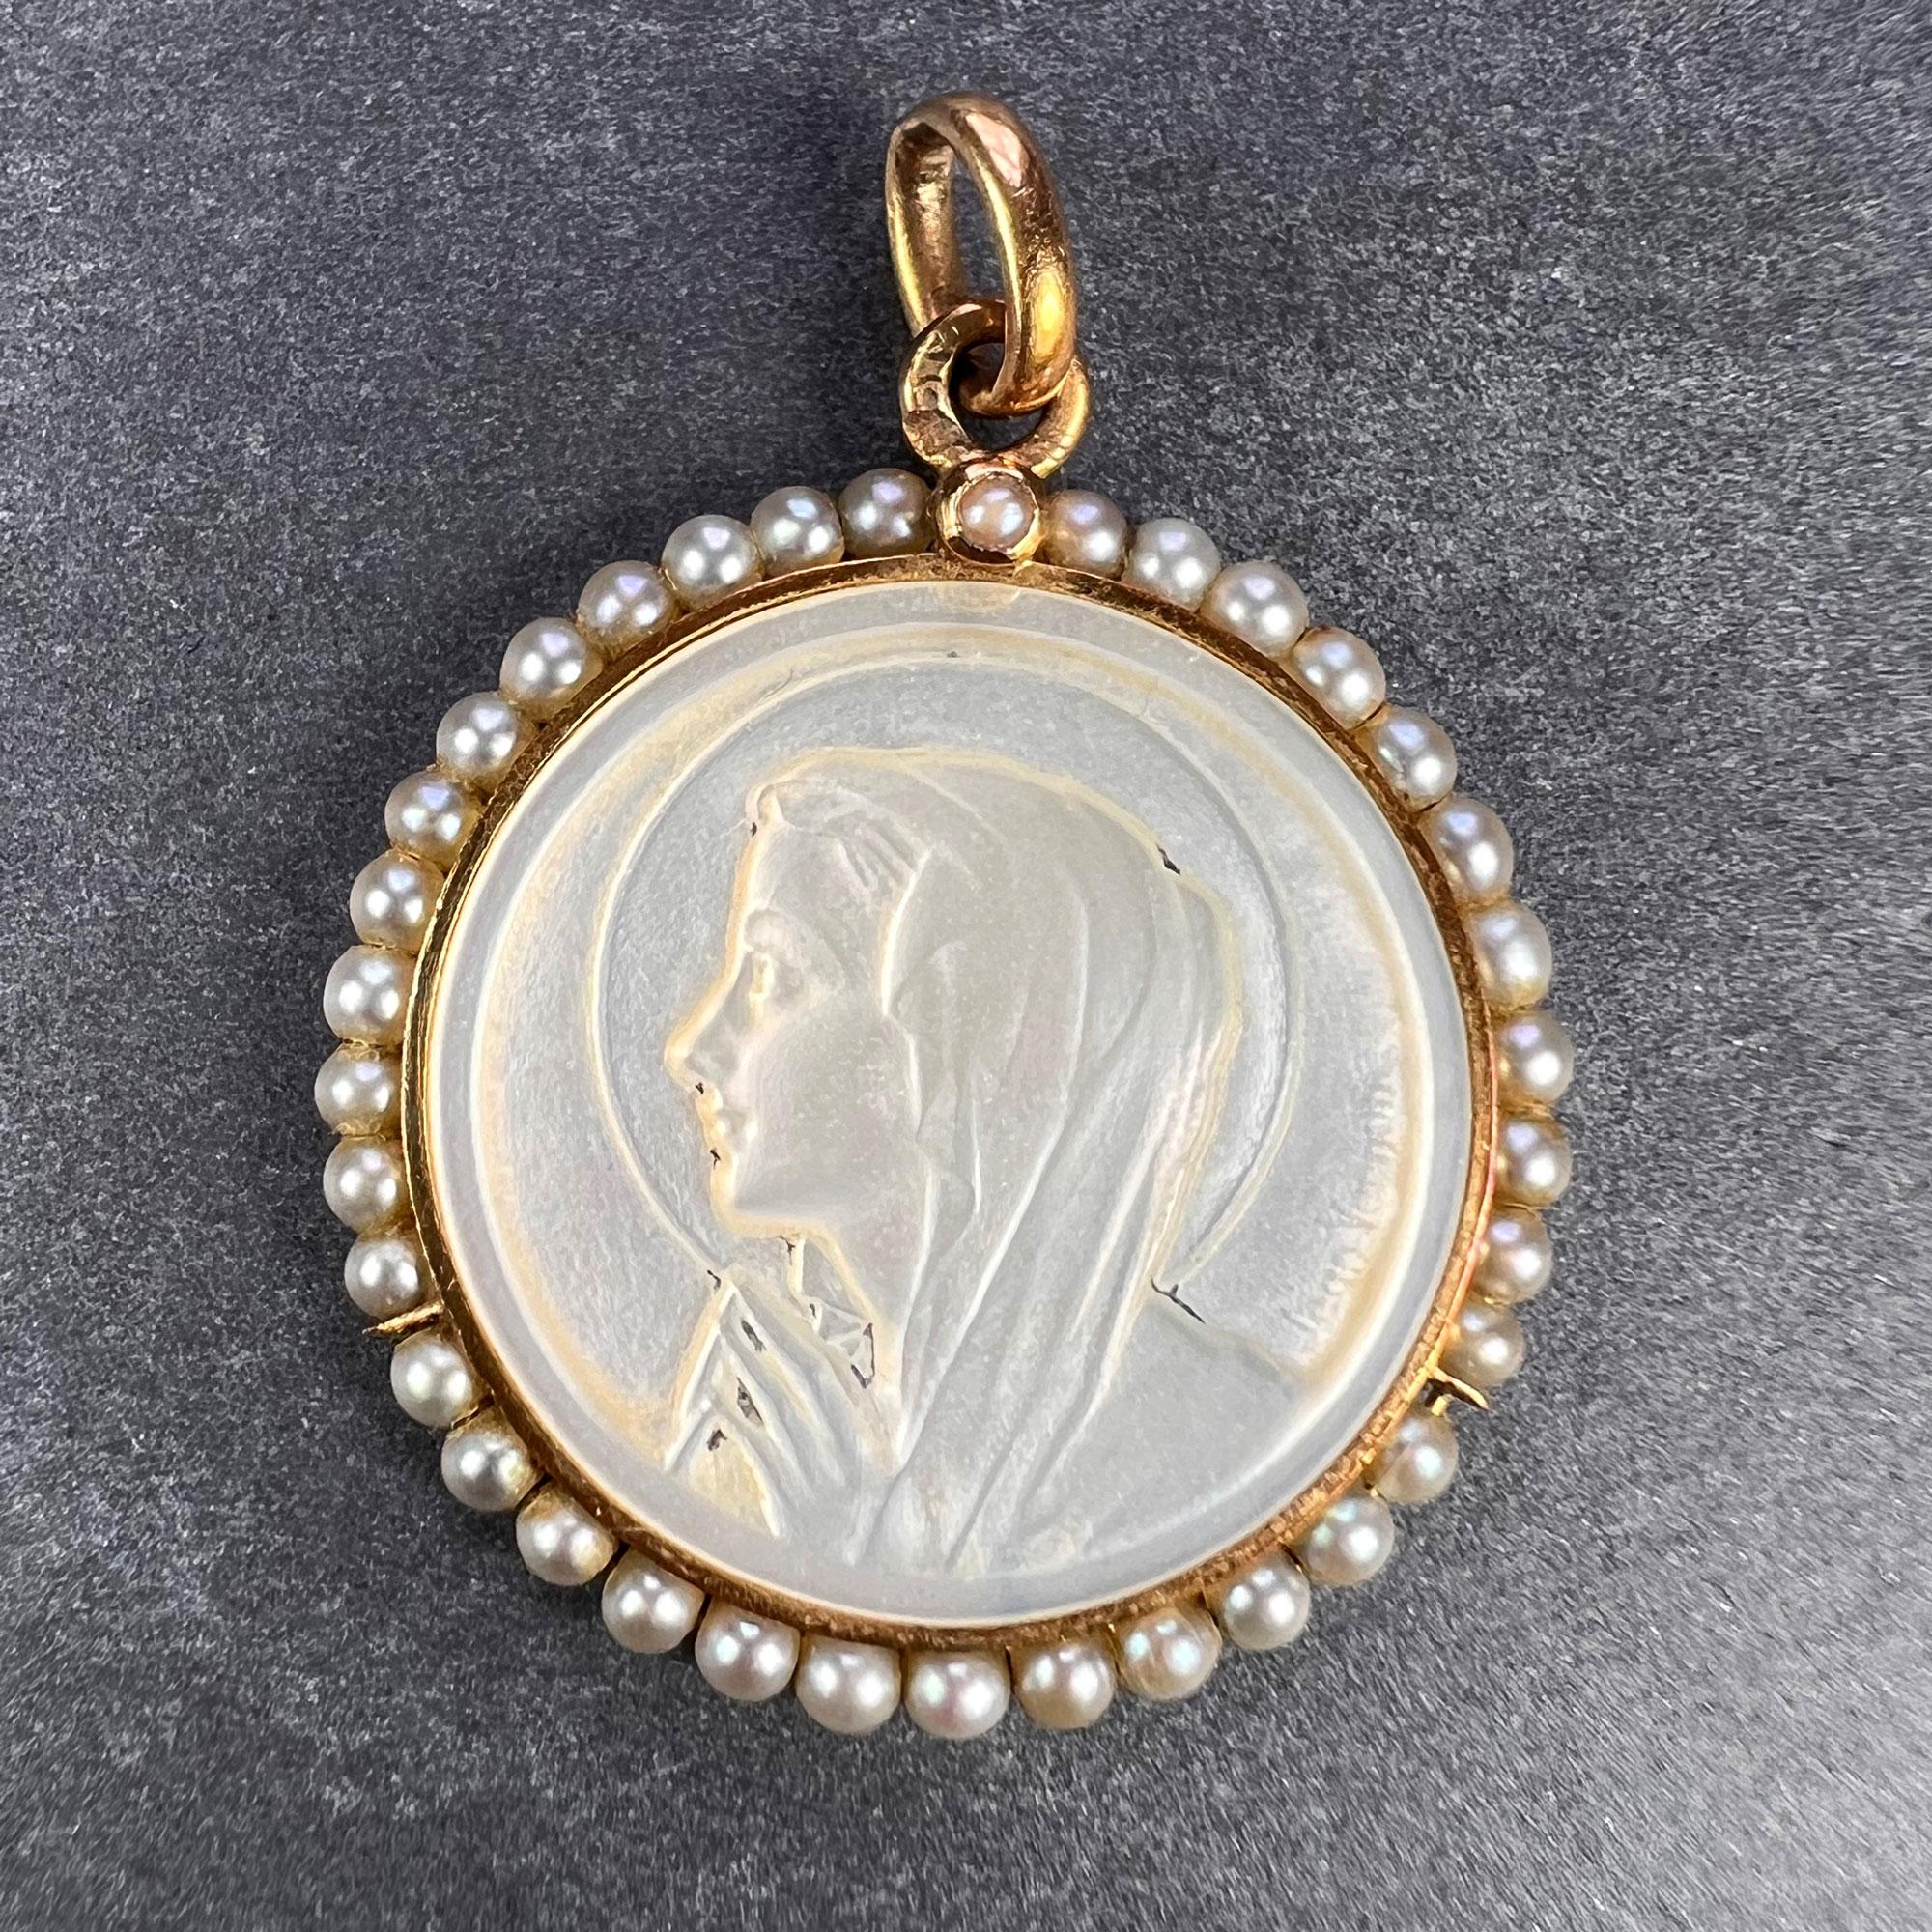 A French 18 karat (18K) yellow gold charm pendant designed as a mother-of-pearl medal depicting the Virgin Mary carved and signed by Jean Vernon surrounded by 36 natural seed pearls. Stamped with the eagle mark for 18 karat gold and French